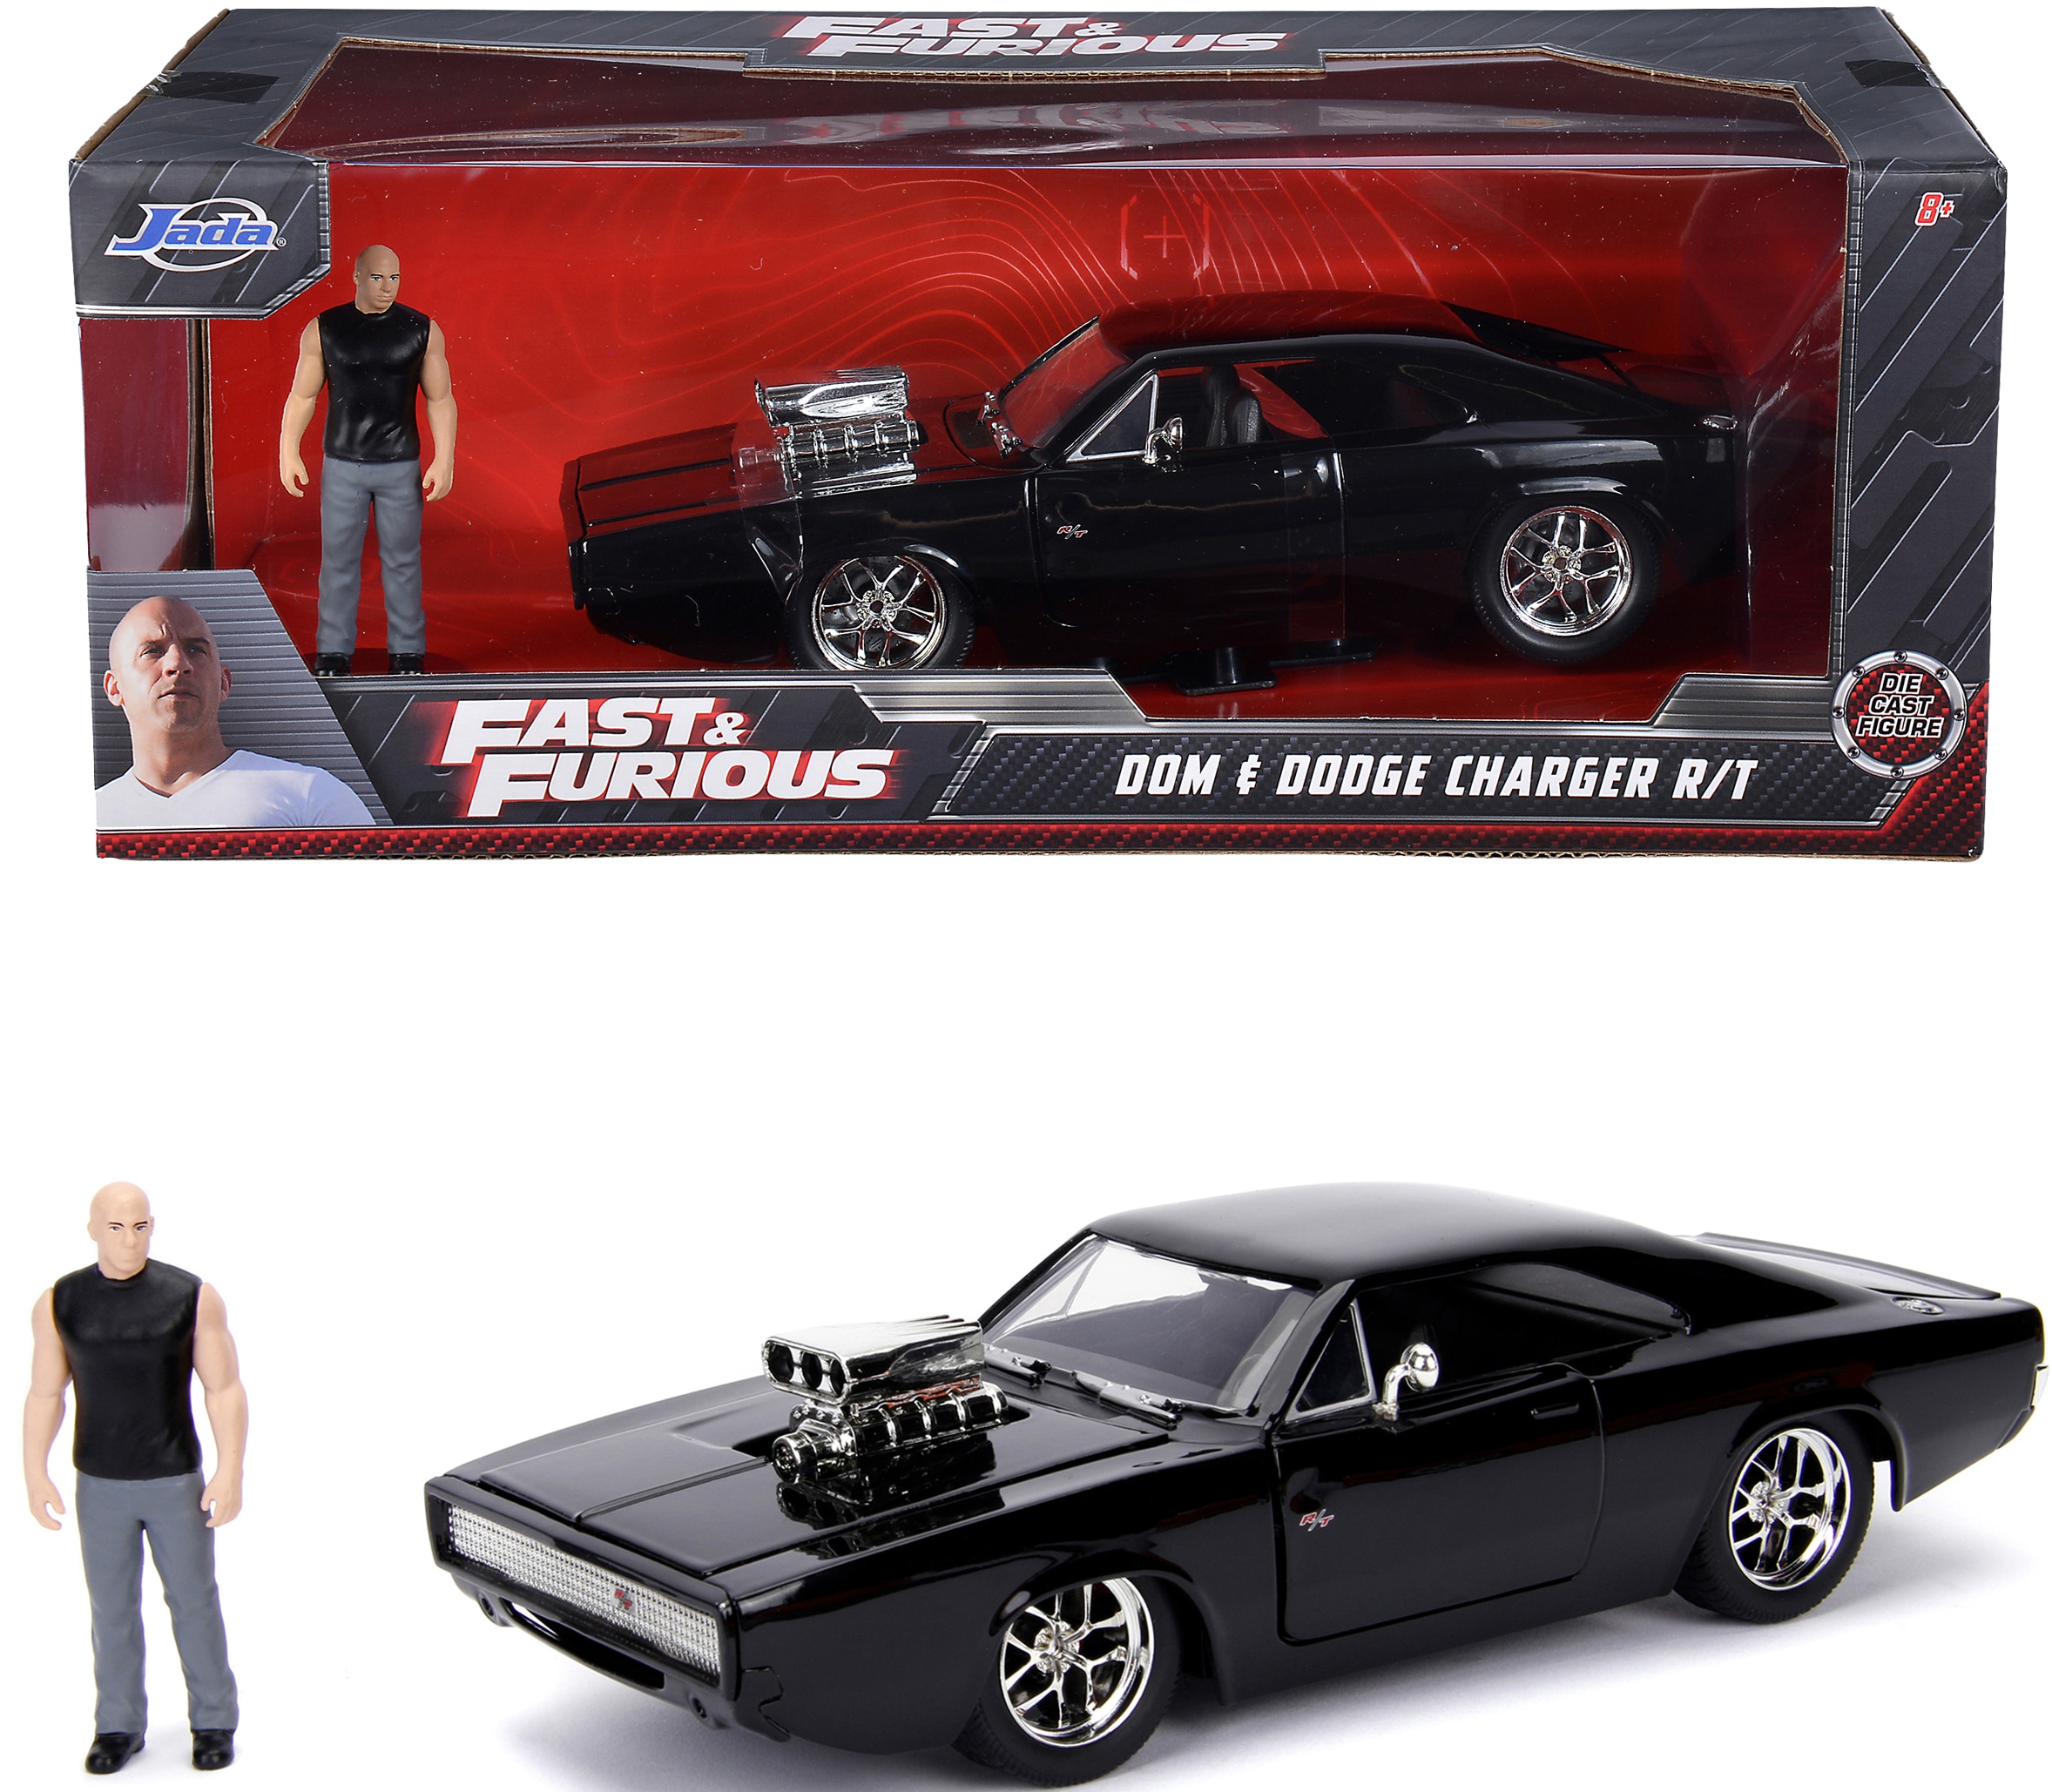 Spielzeug-Auto »Fast & Furious, Dodge Charger«